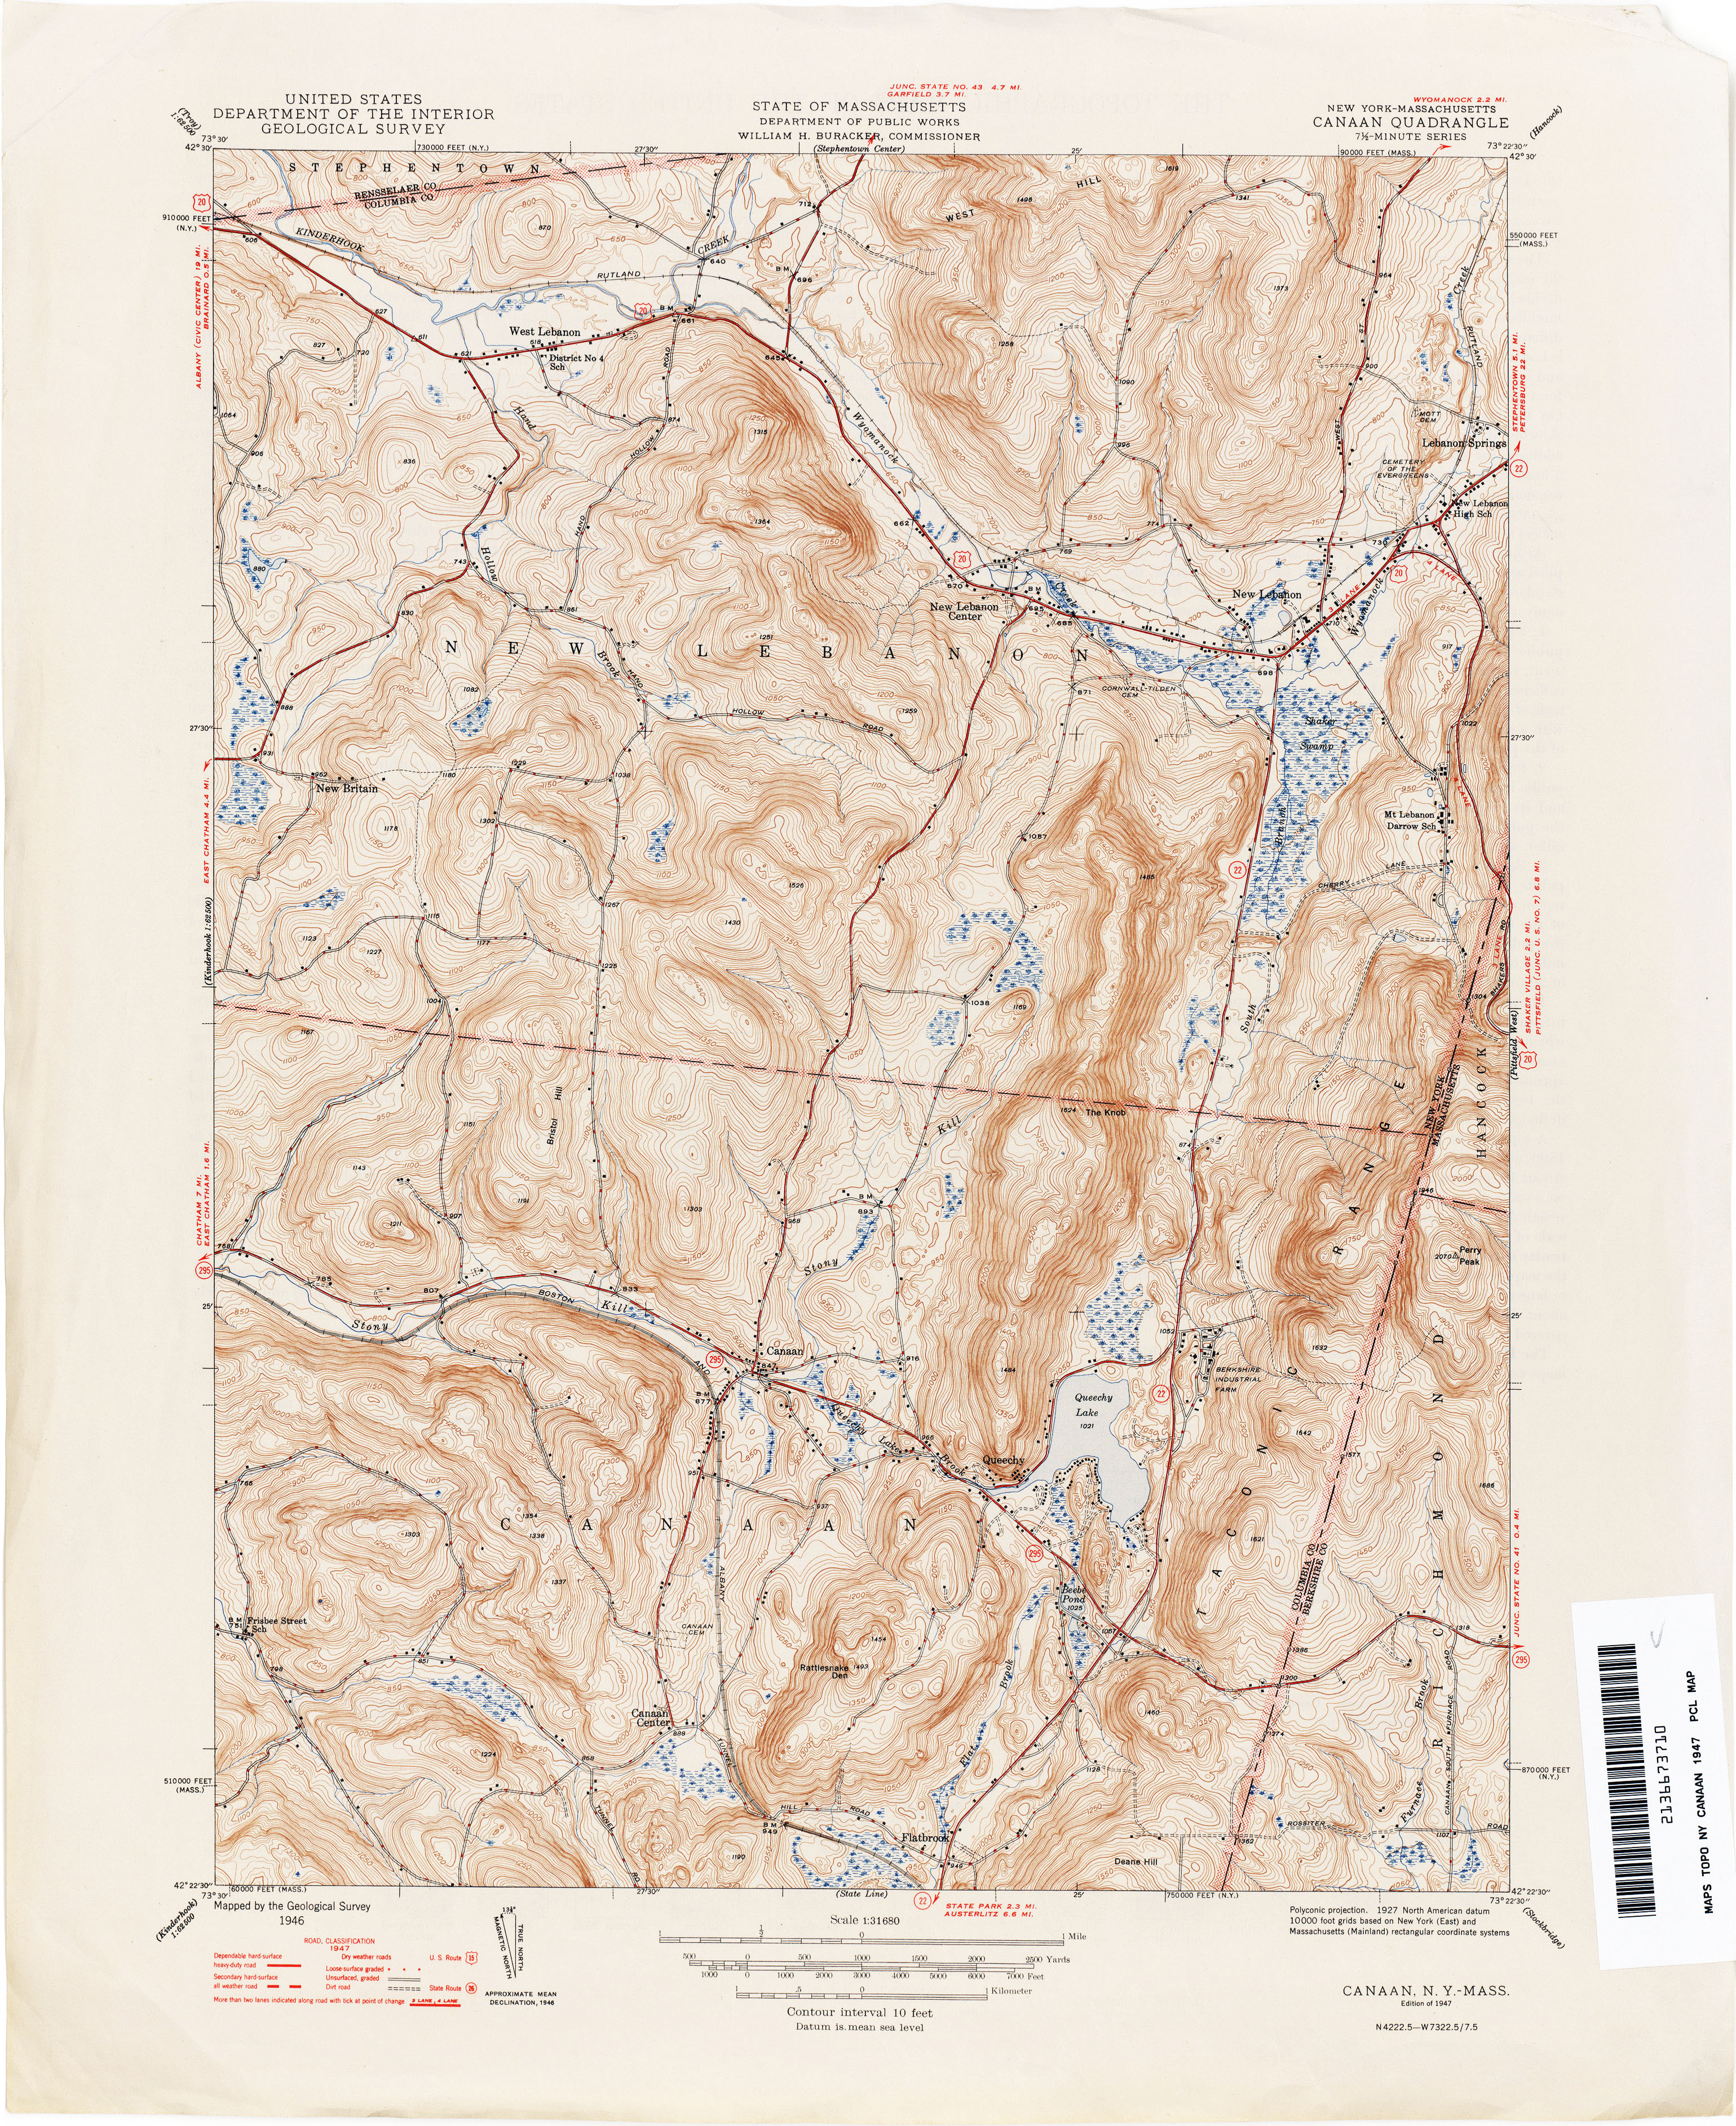 New York Topographic Maps Perry Castaneda Map Collection Ut